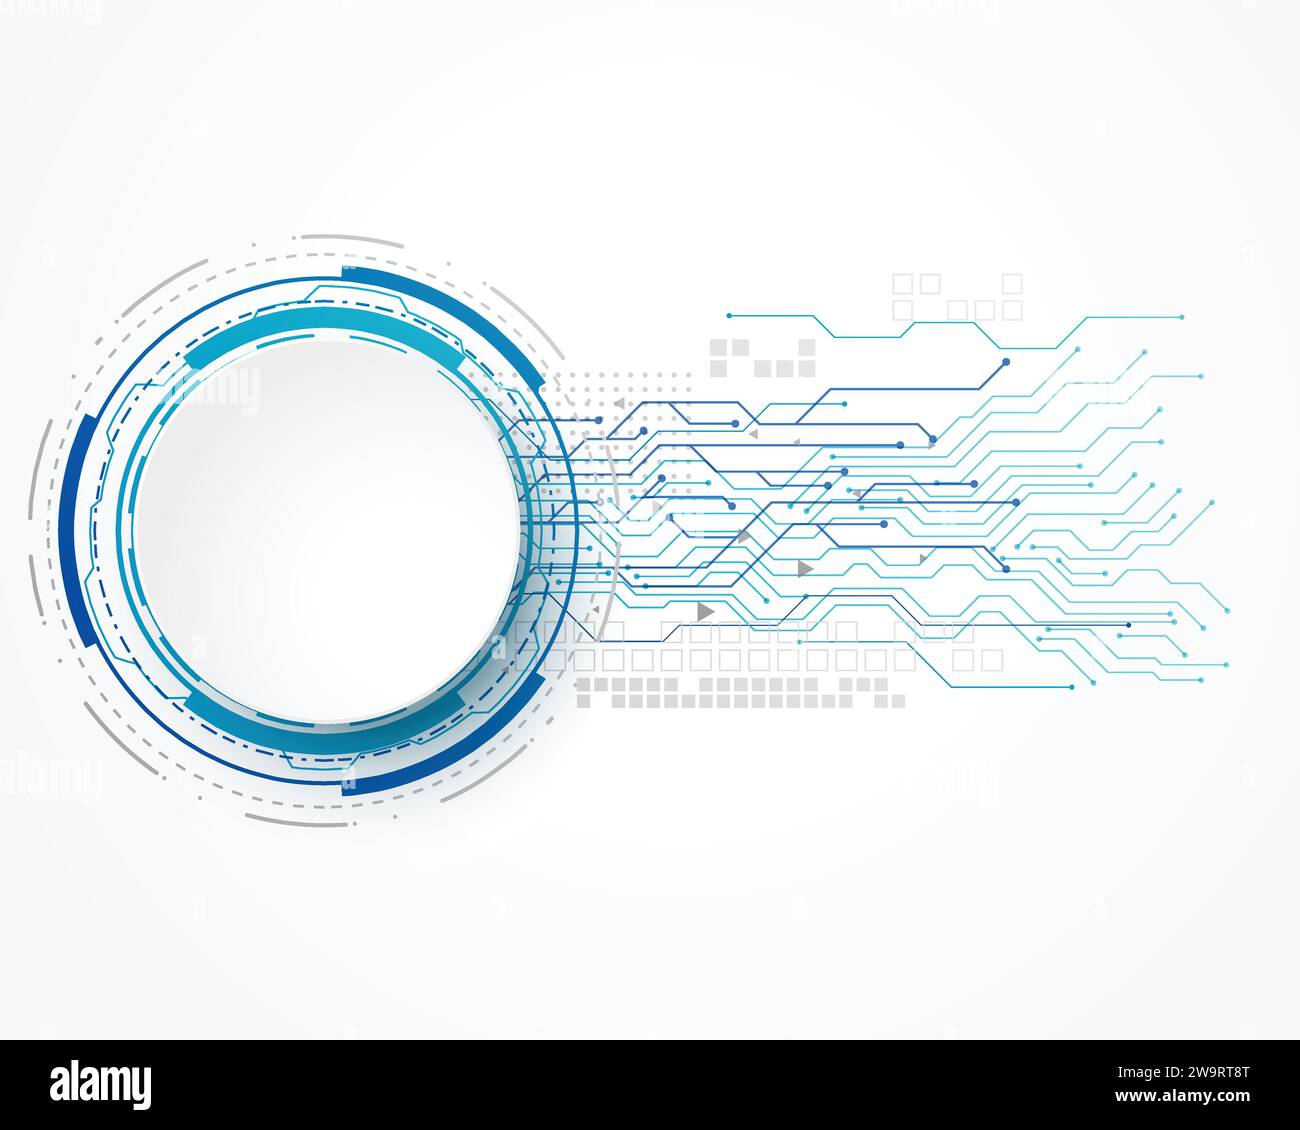 Digital technology banner with circuit diagram 2354 Stock Vector